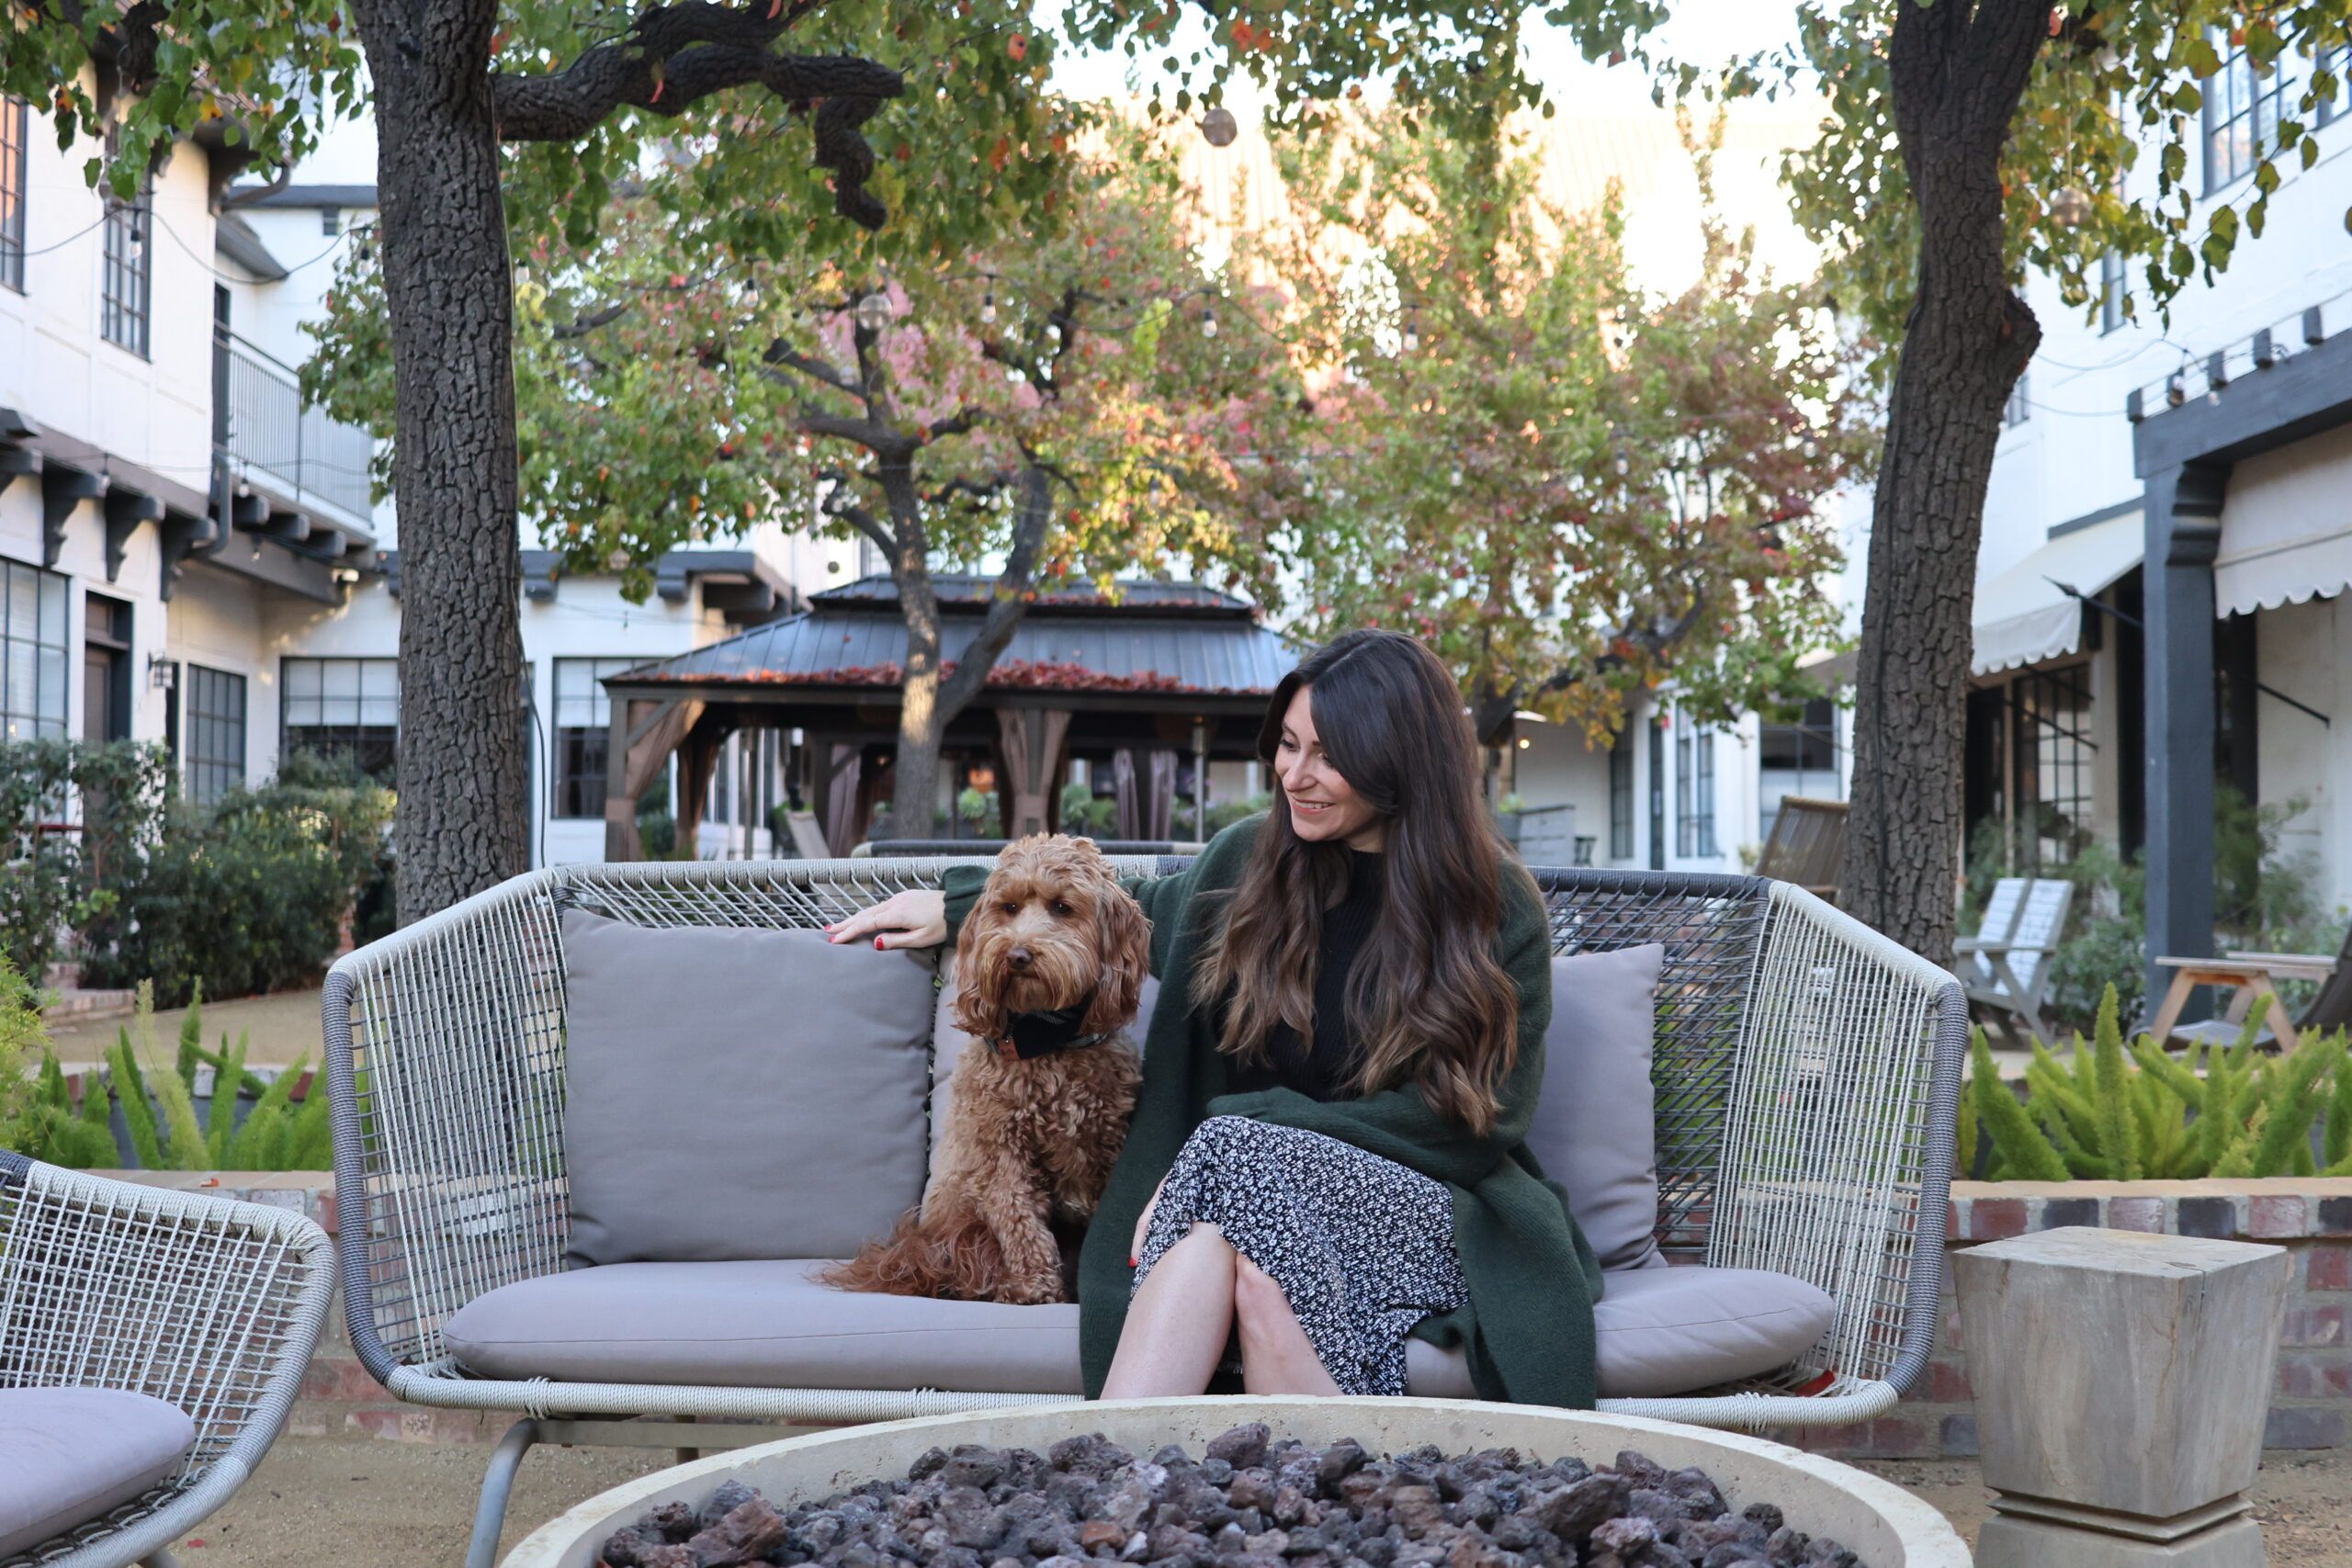 Melanie and her pup, Ruby outside on a bench